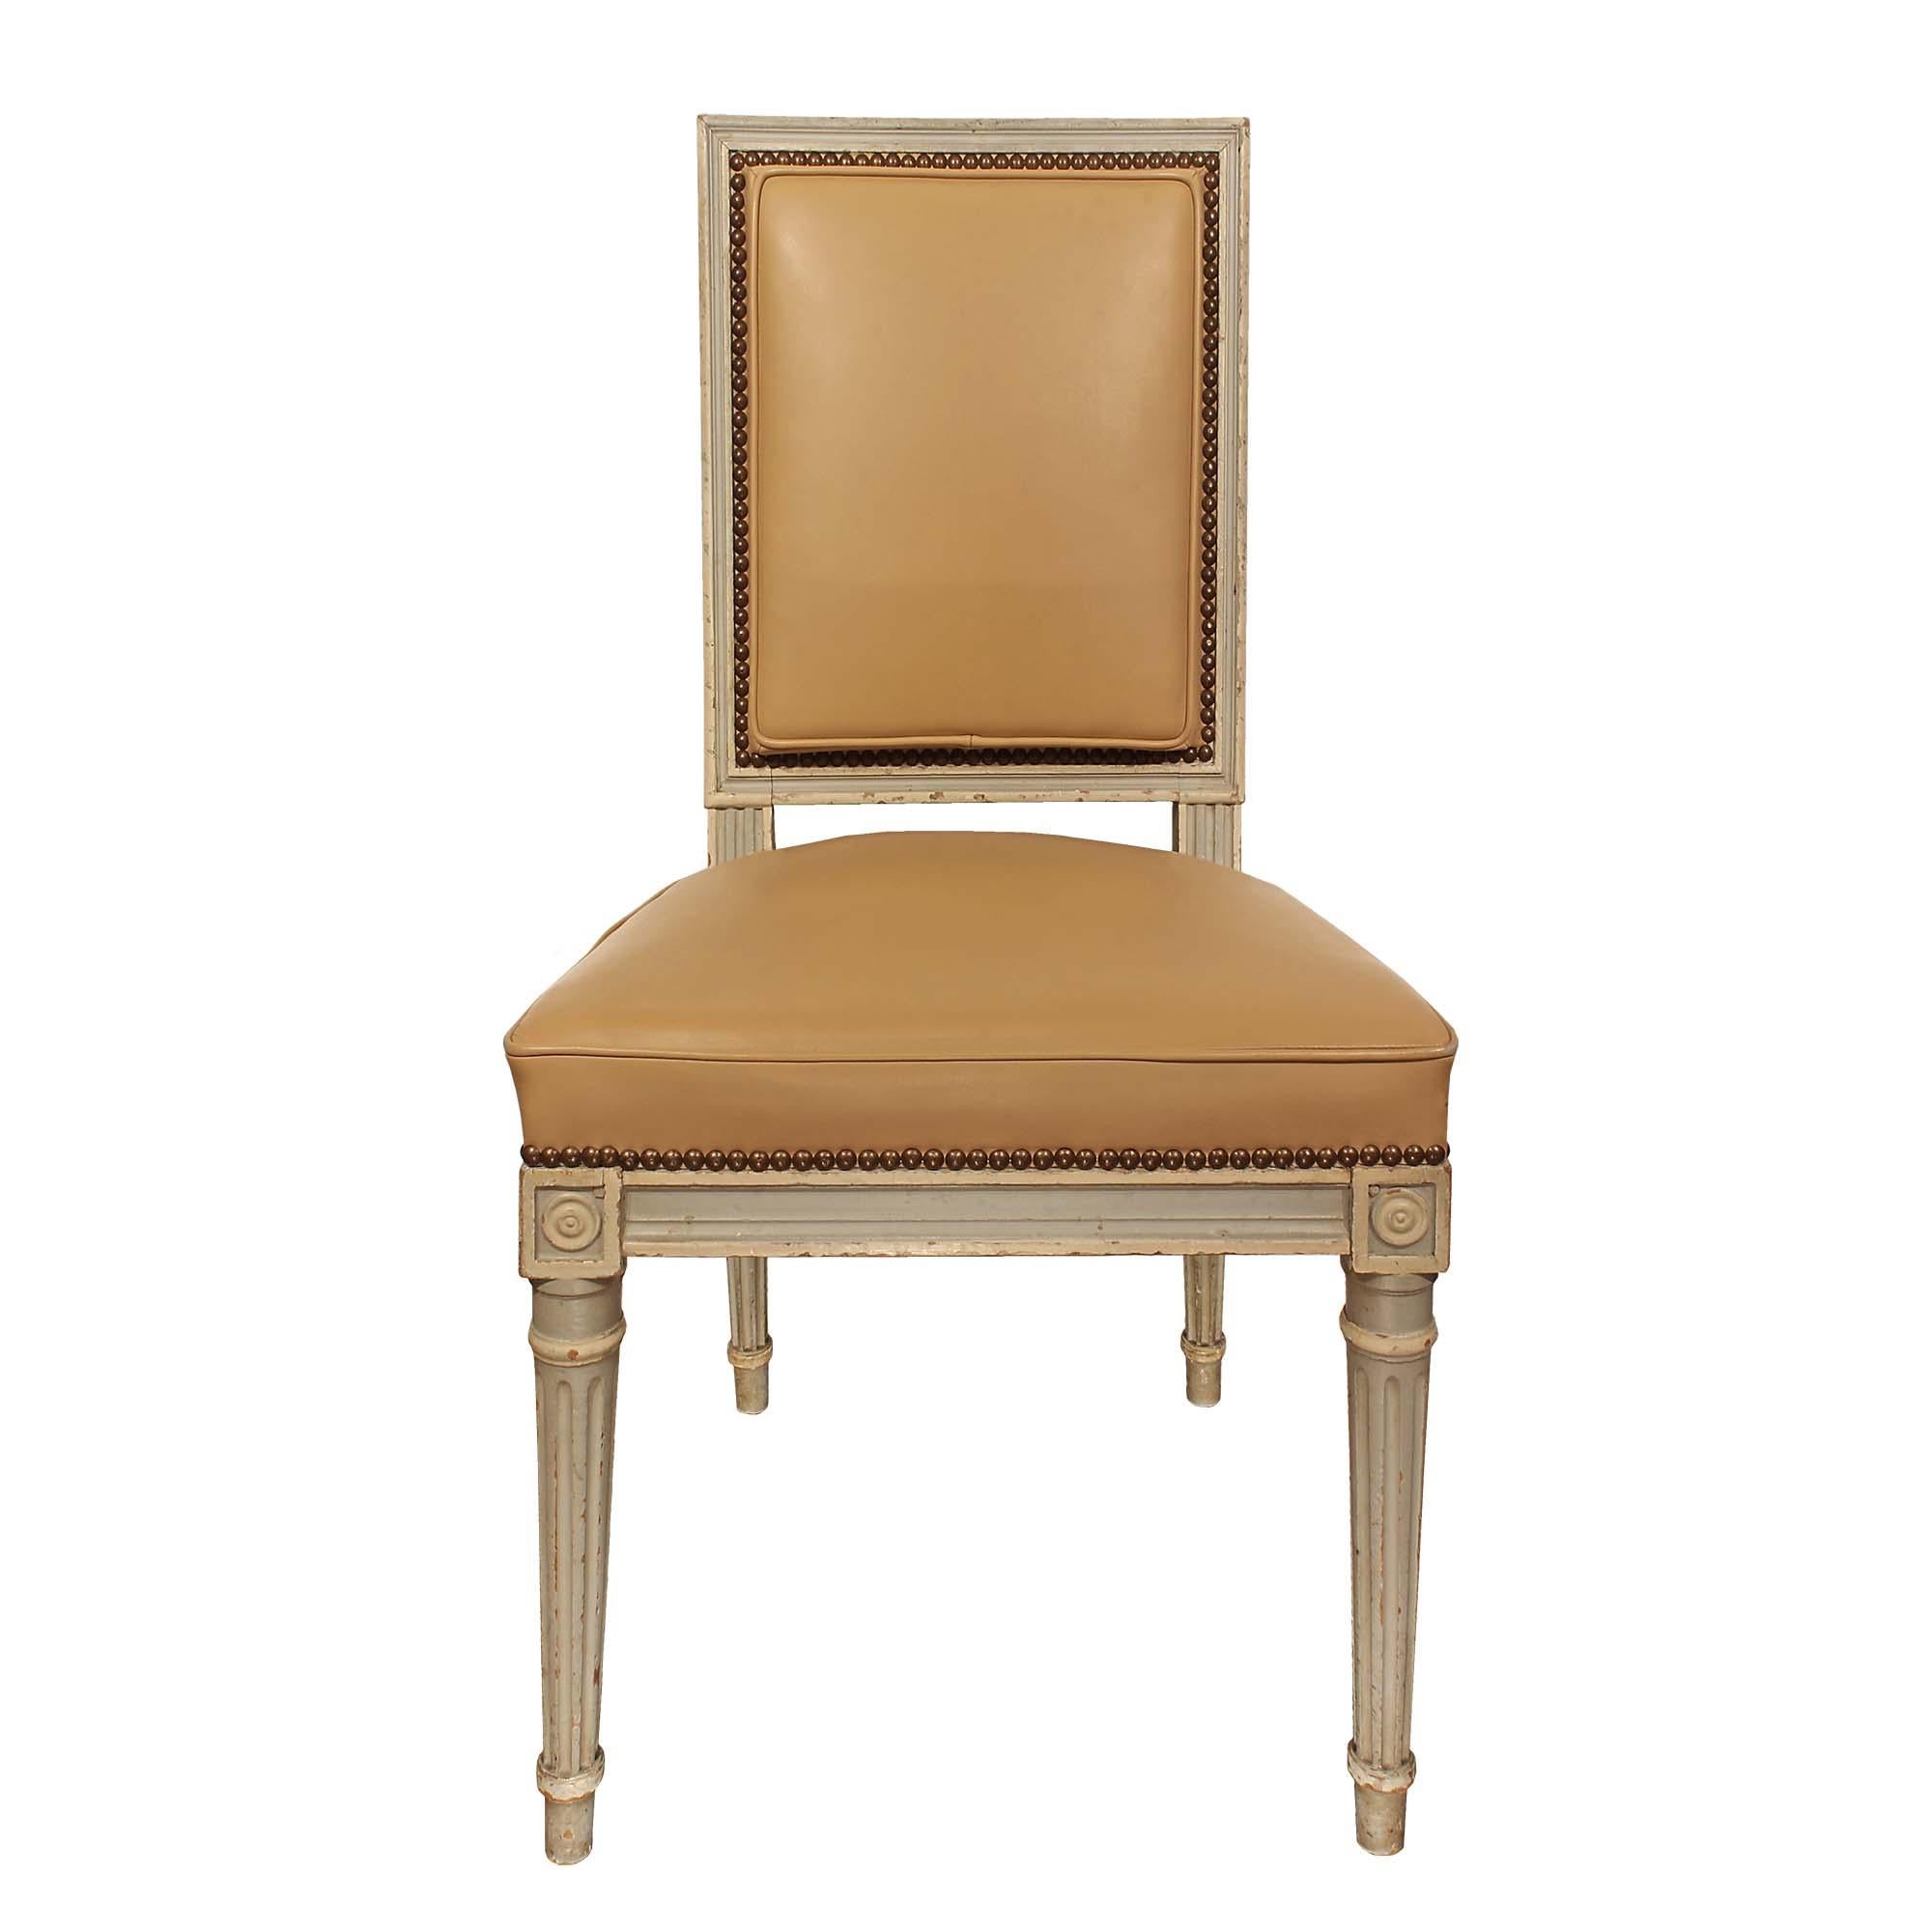 A striking set of six French 19th century Louis XVI st. patinated dining chairs. Each chair is raised by four slender circular tapered fluted legs with block rosettes at each corner. The seat and back support are upholstered in a beige leather, with